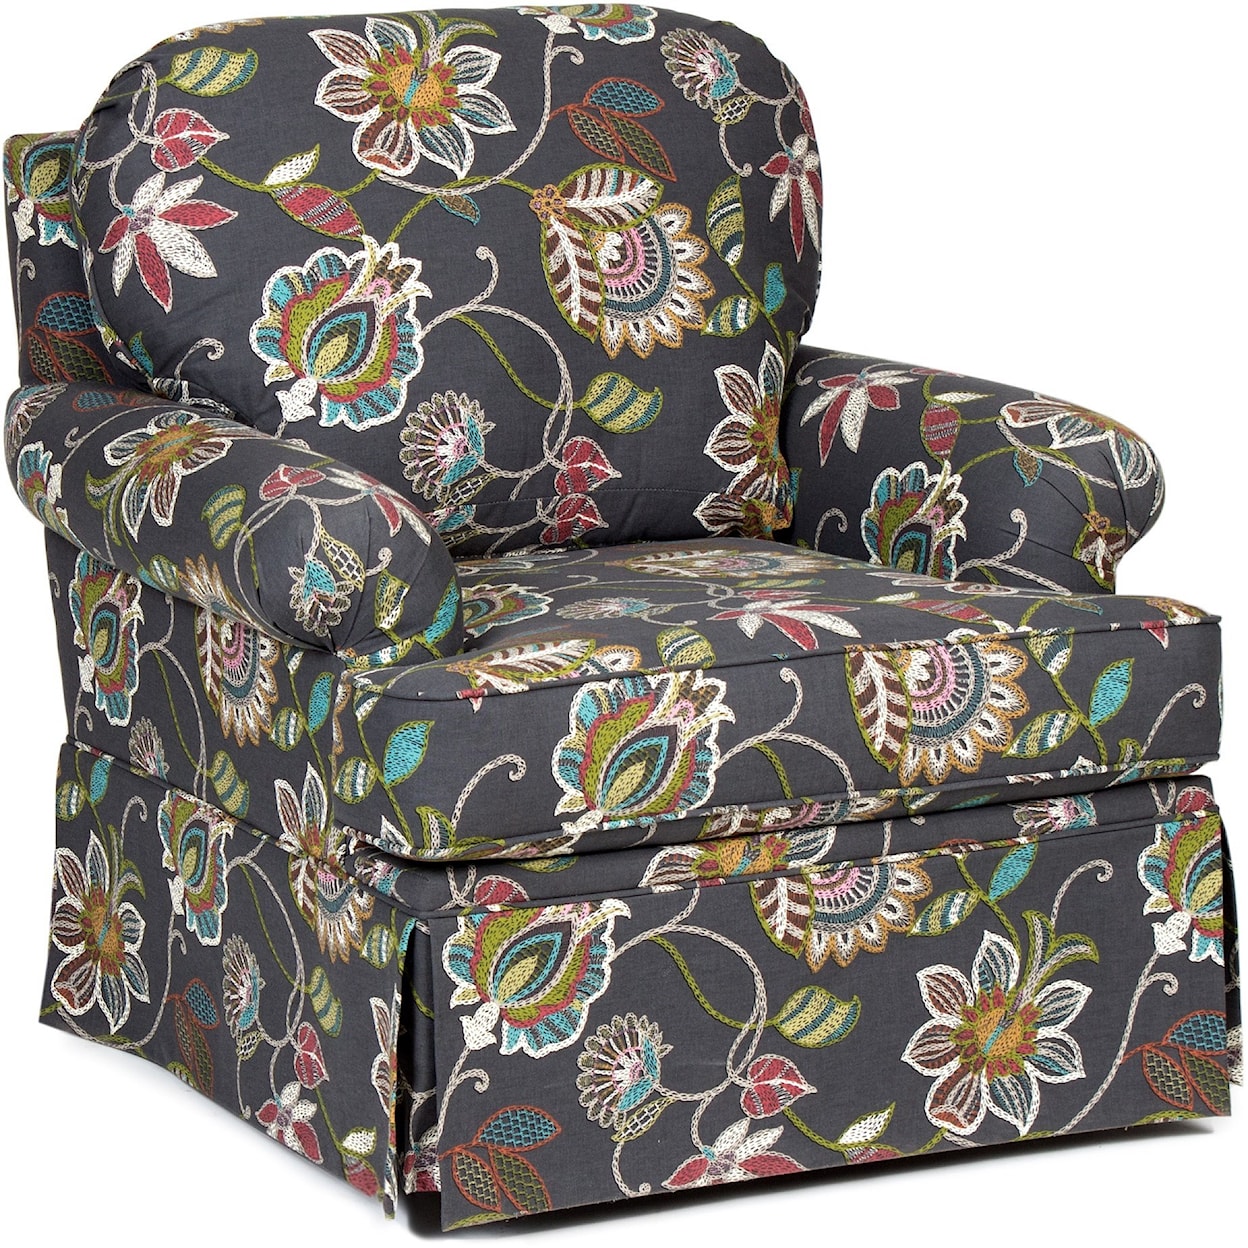 Chairs America Accent Chairs and Ottomans Stationary Skirted Chair